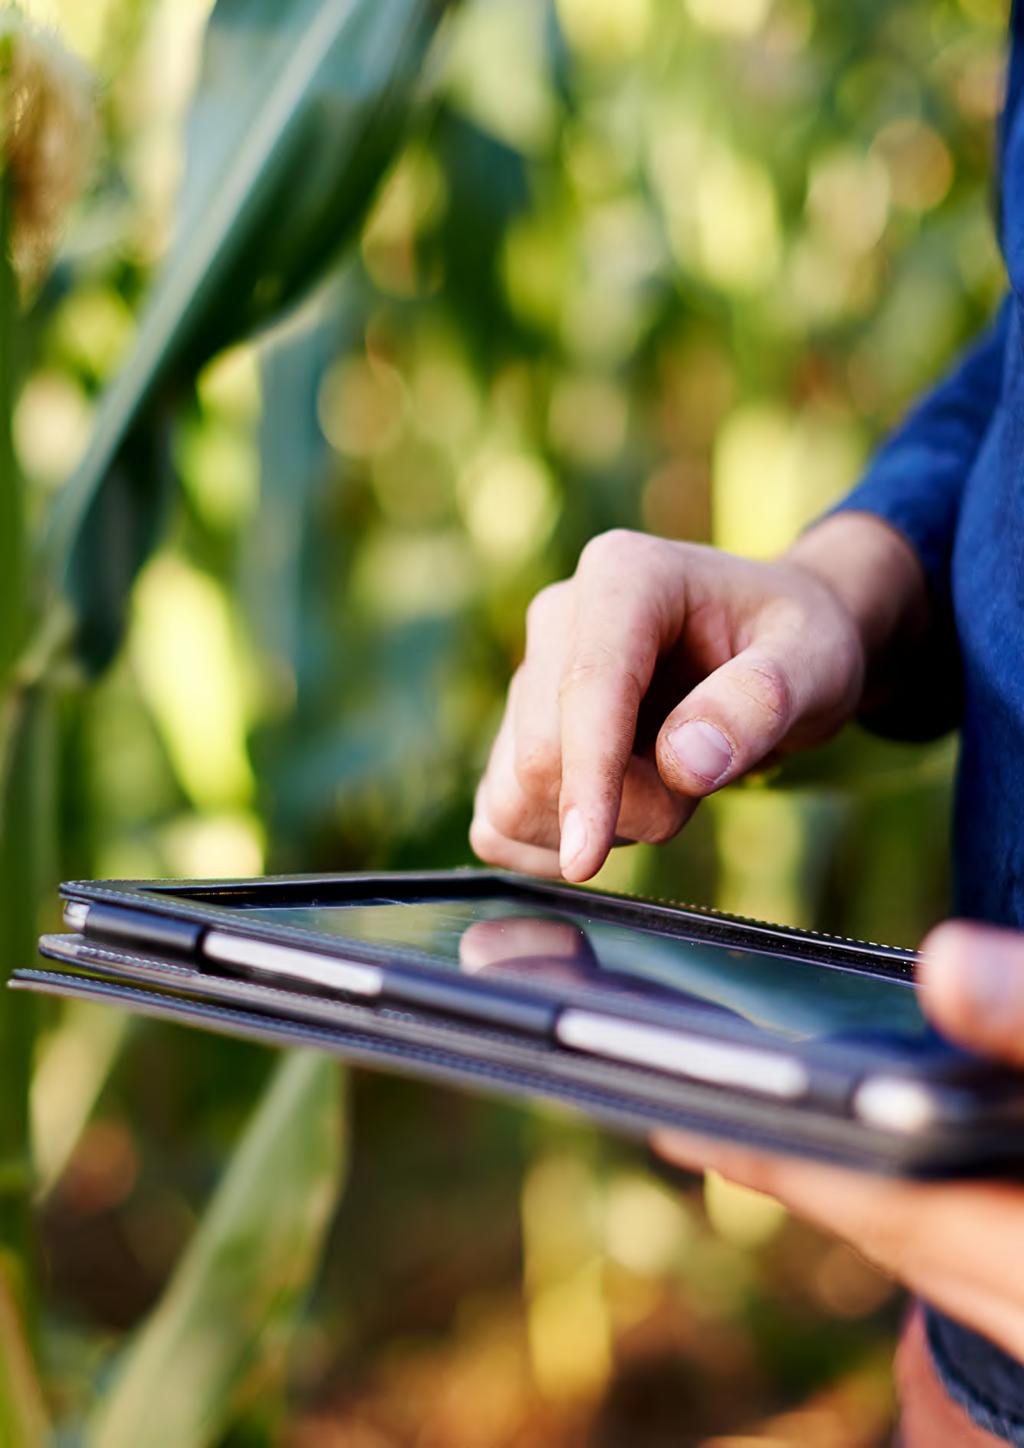 Digital agriculture: influences, trends, and opportunities among ag retailers Authors: Rob Dongoski Partner, Agribusiness Ernst &